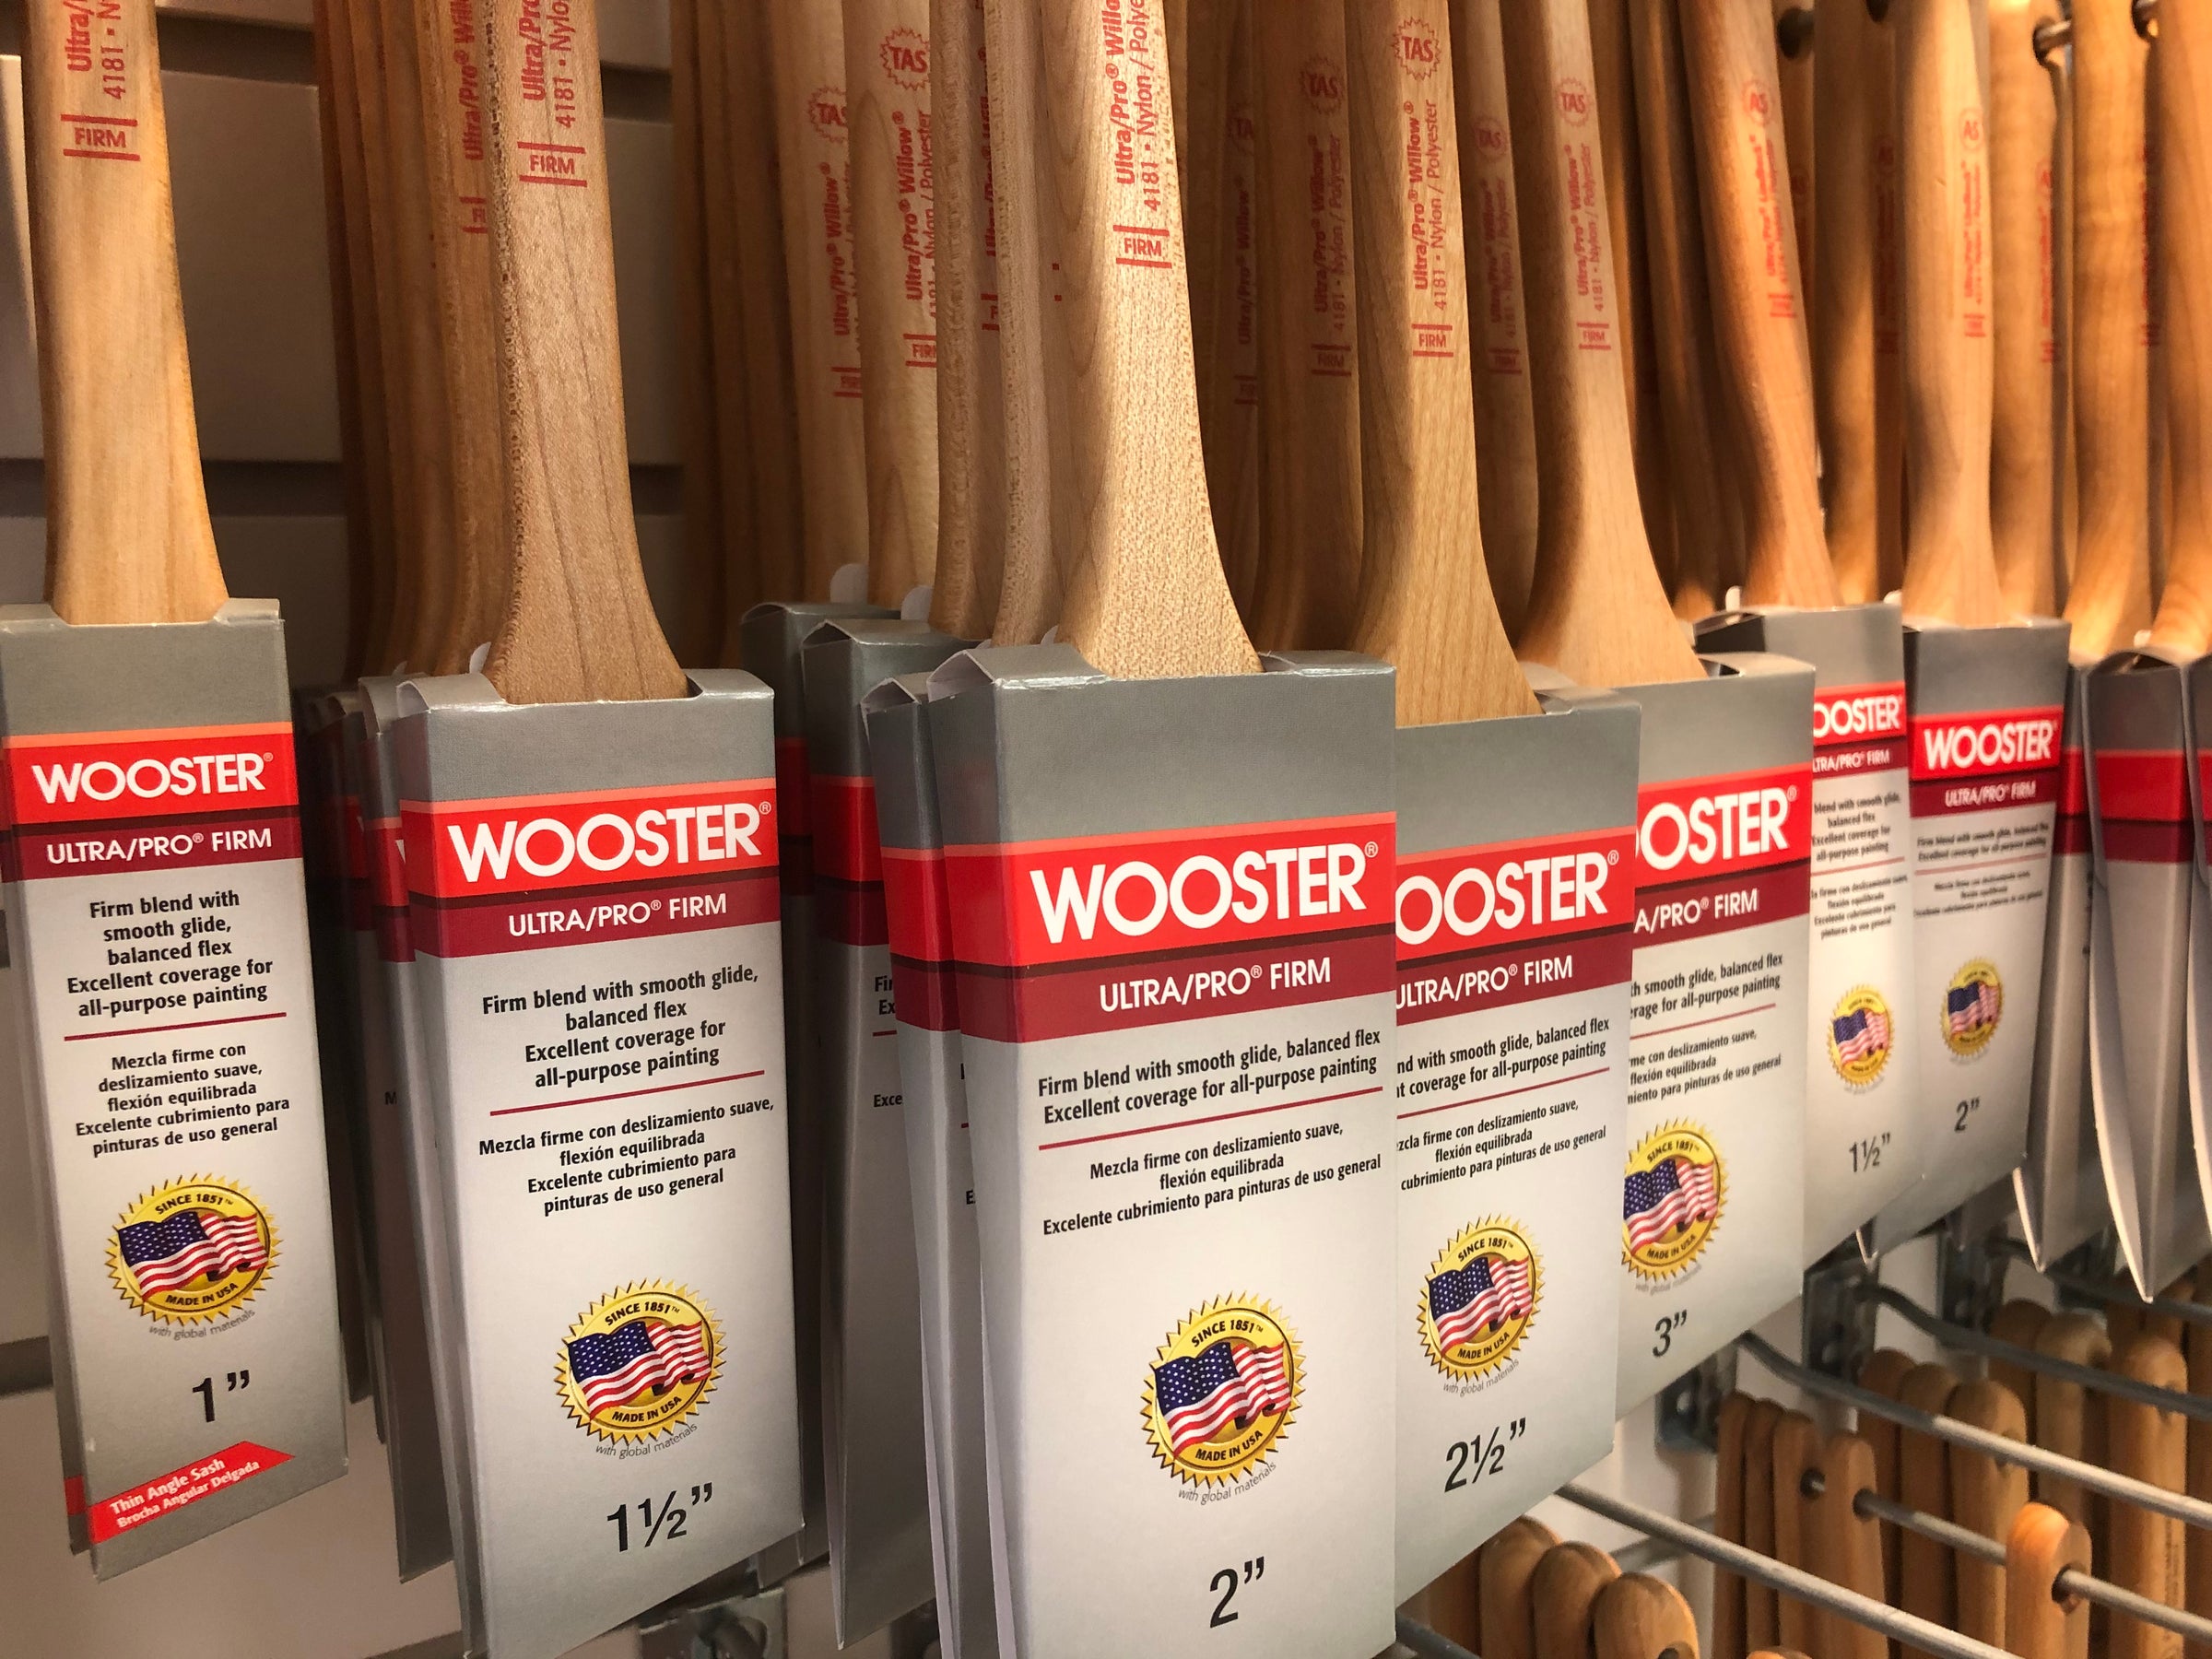 Wooster Brushes - Wooster Brush Company